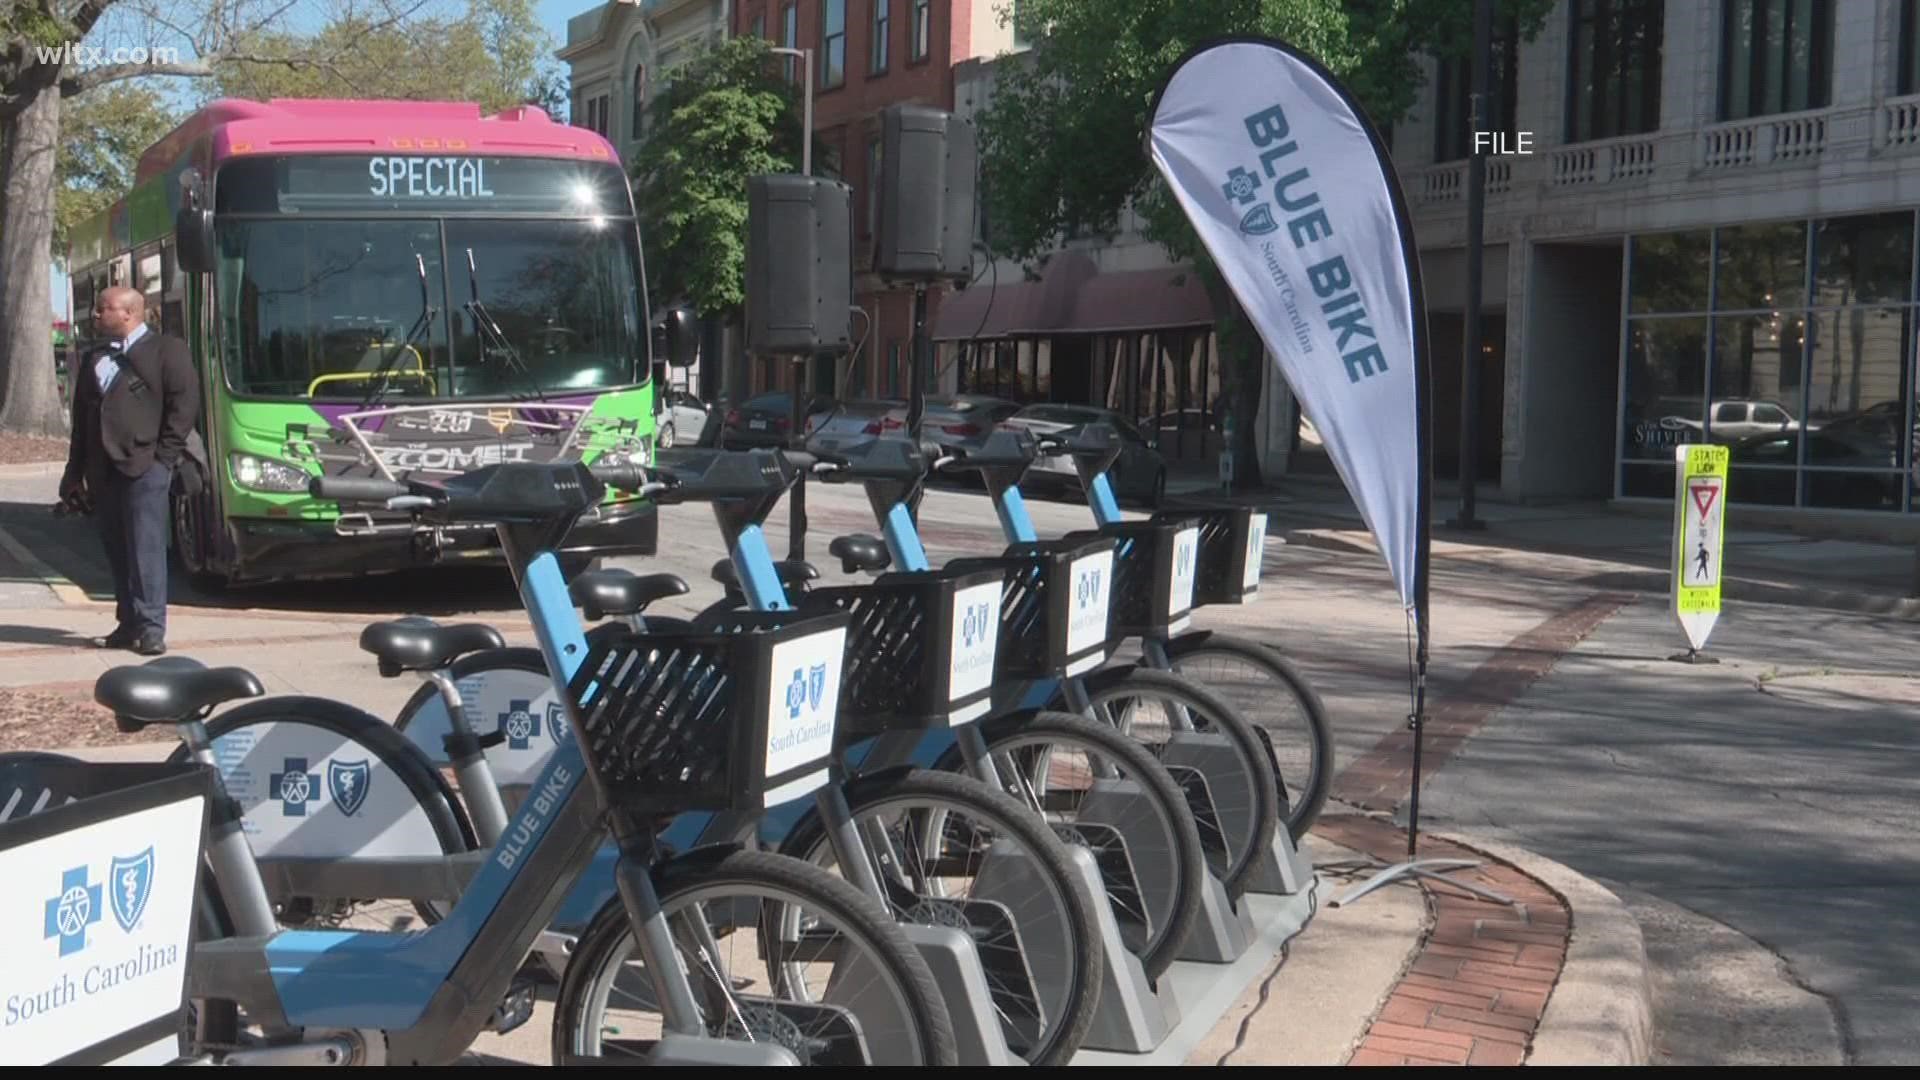 Several Midlands towns and cities are asking for the public's input on bike riding expansion study.